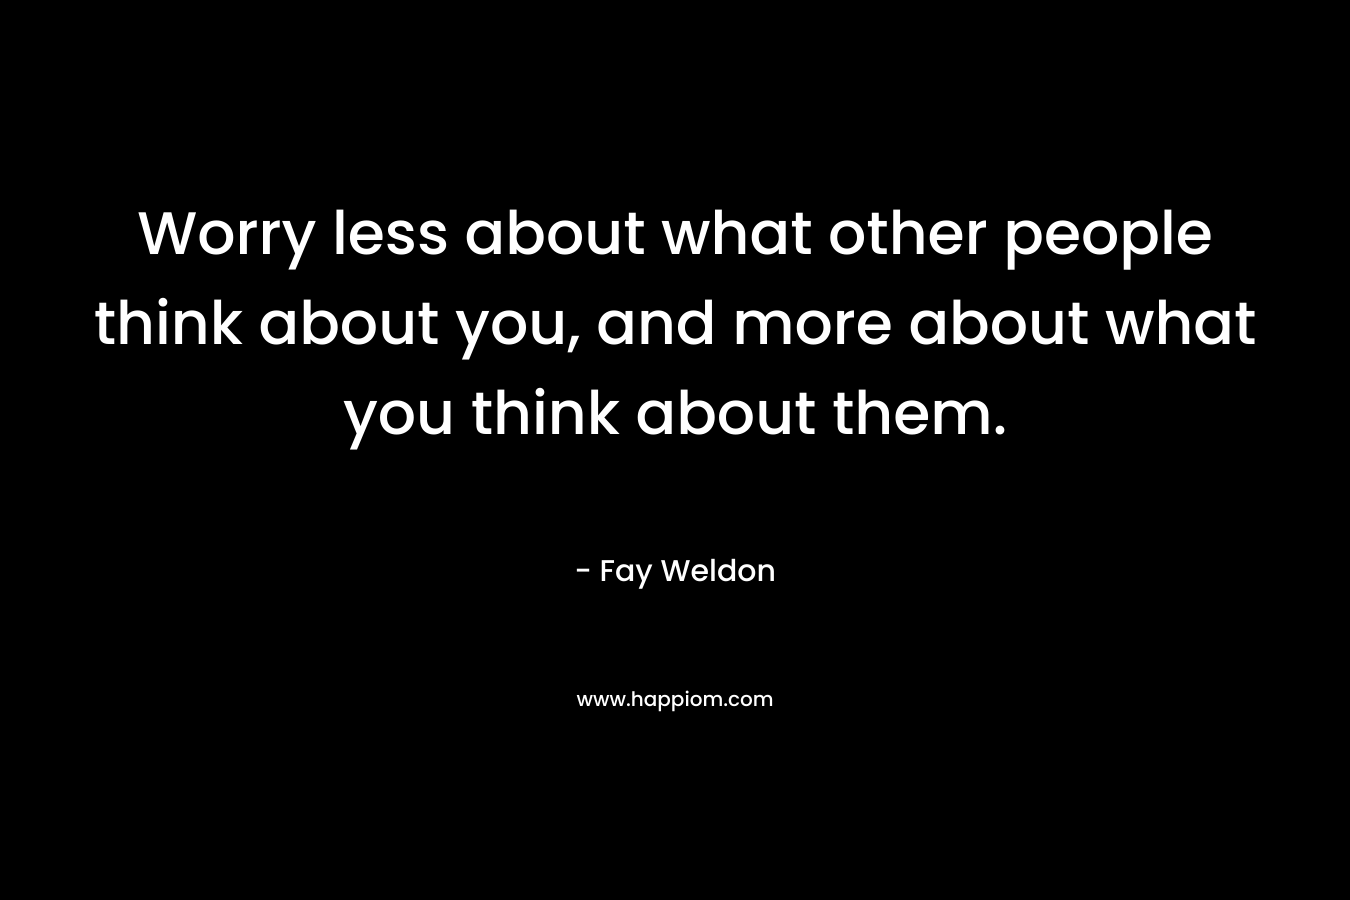 Worry less about what other people think about you, and more about what you think about them.